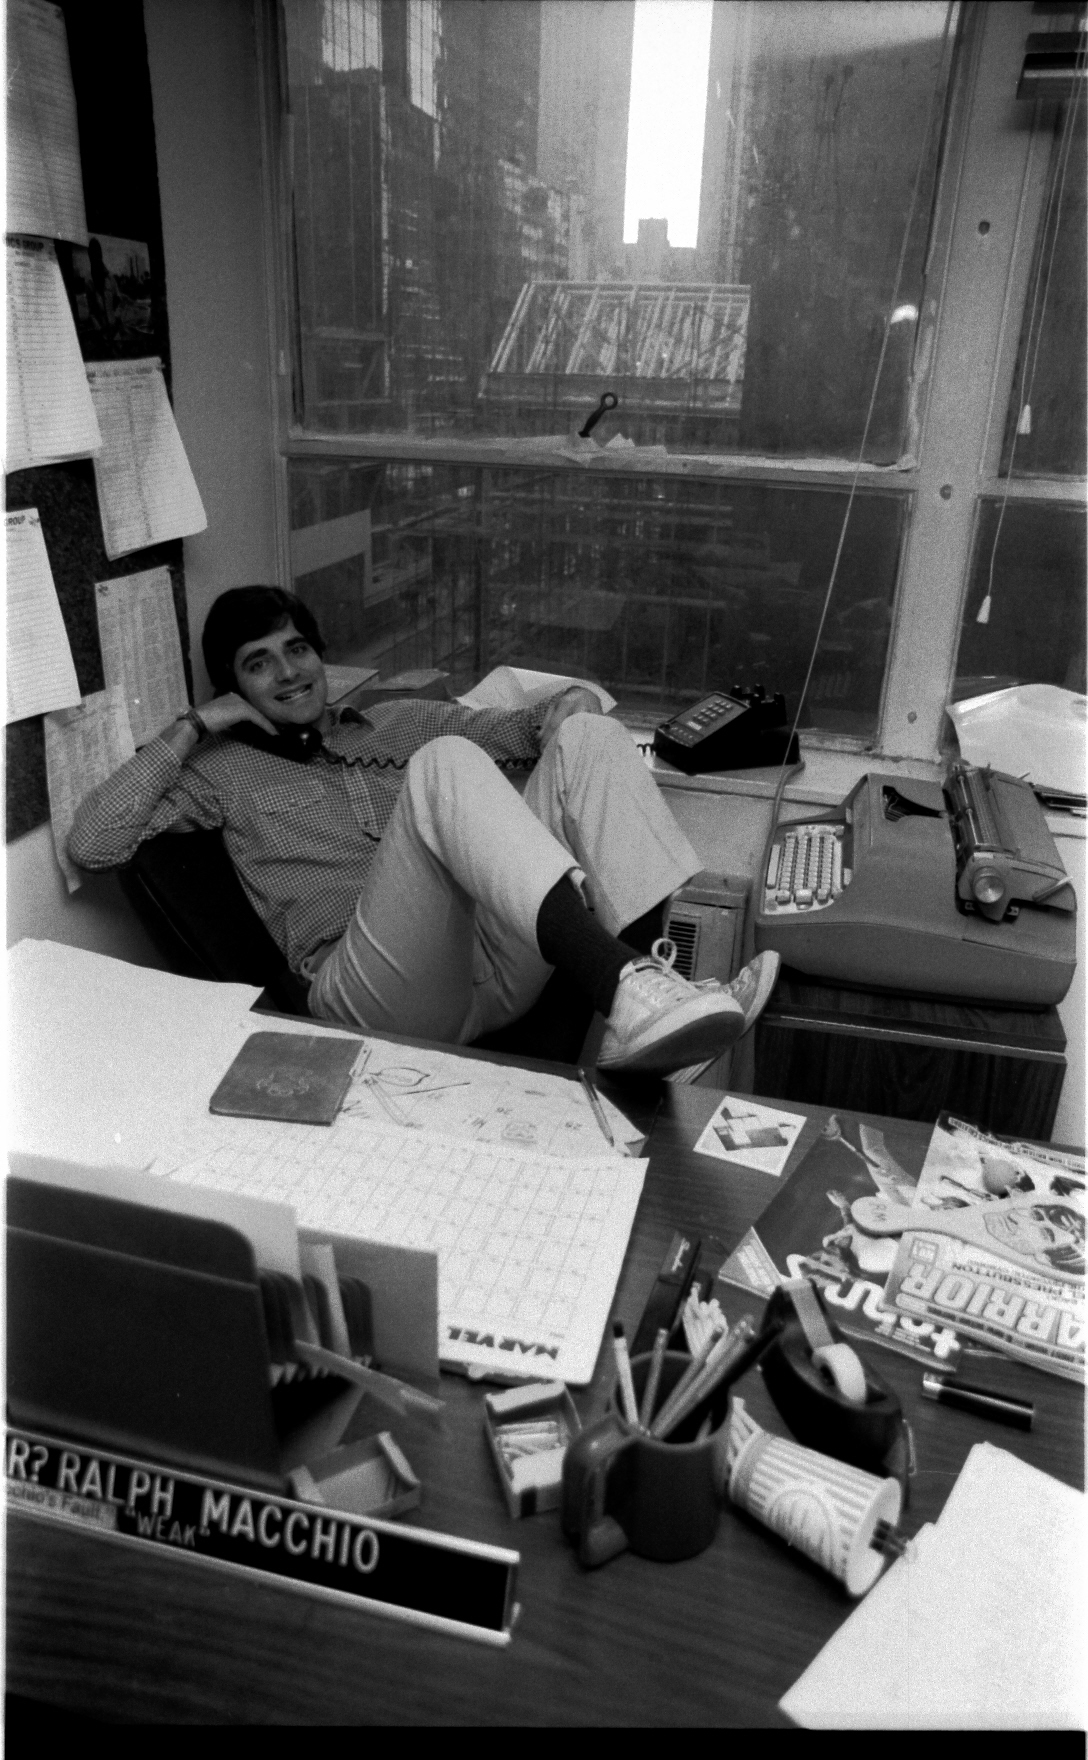 Ralph Macchio in a very typical pose. Ralph has an original Selectric typewriter in front of him, that never left him! Ralph refuses-- to this day-- to step up to any writing device more modern.